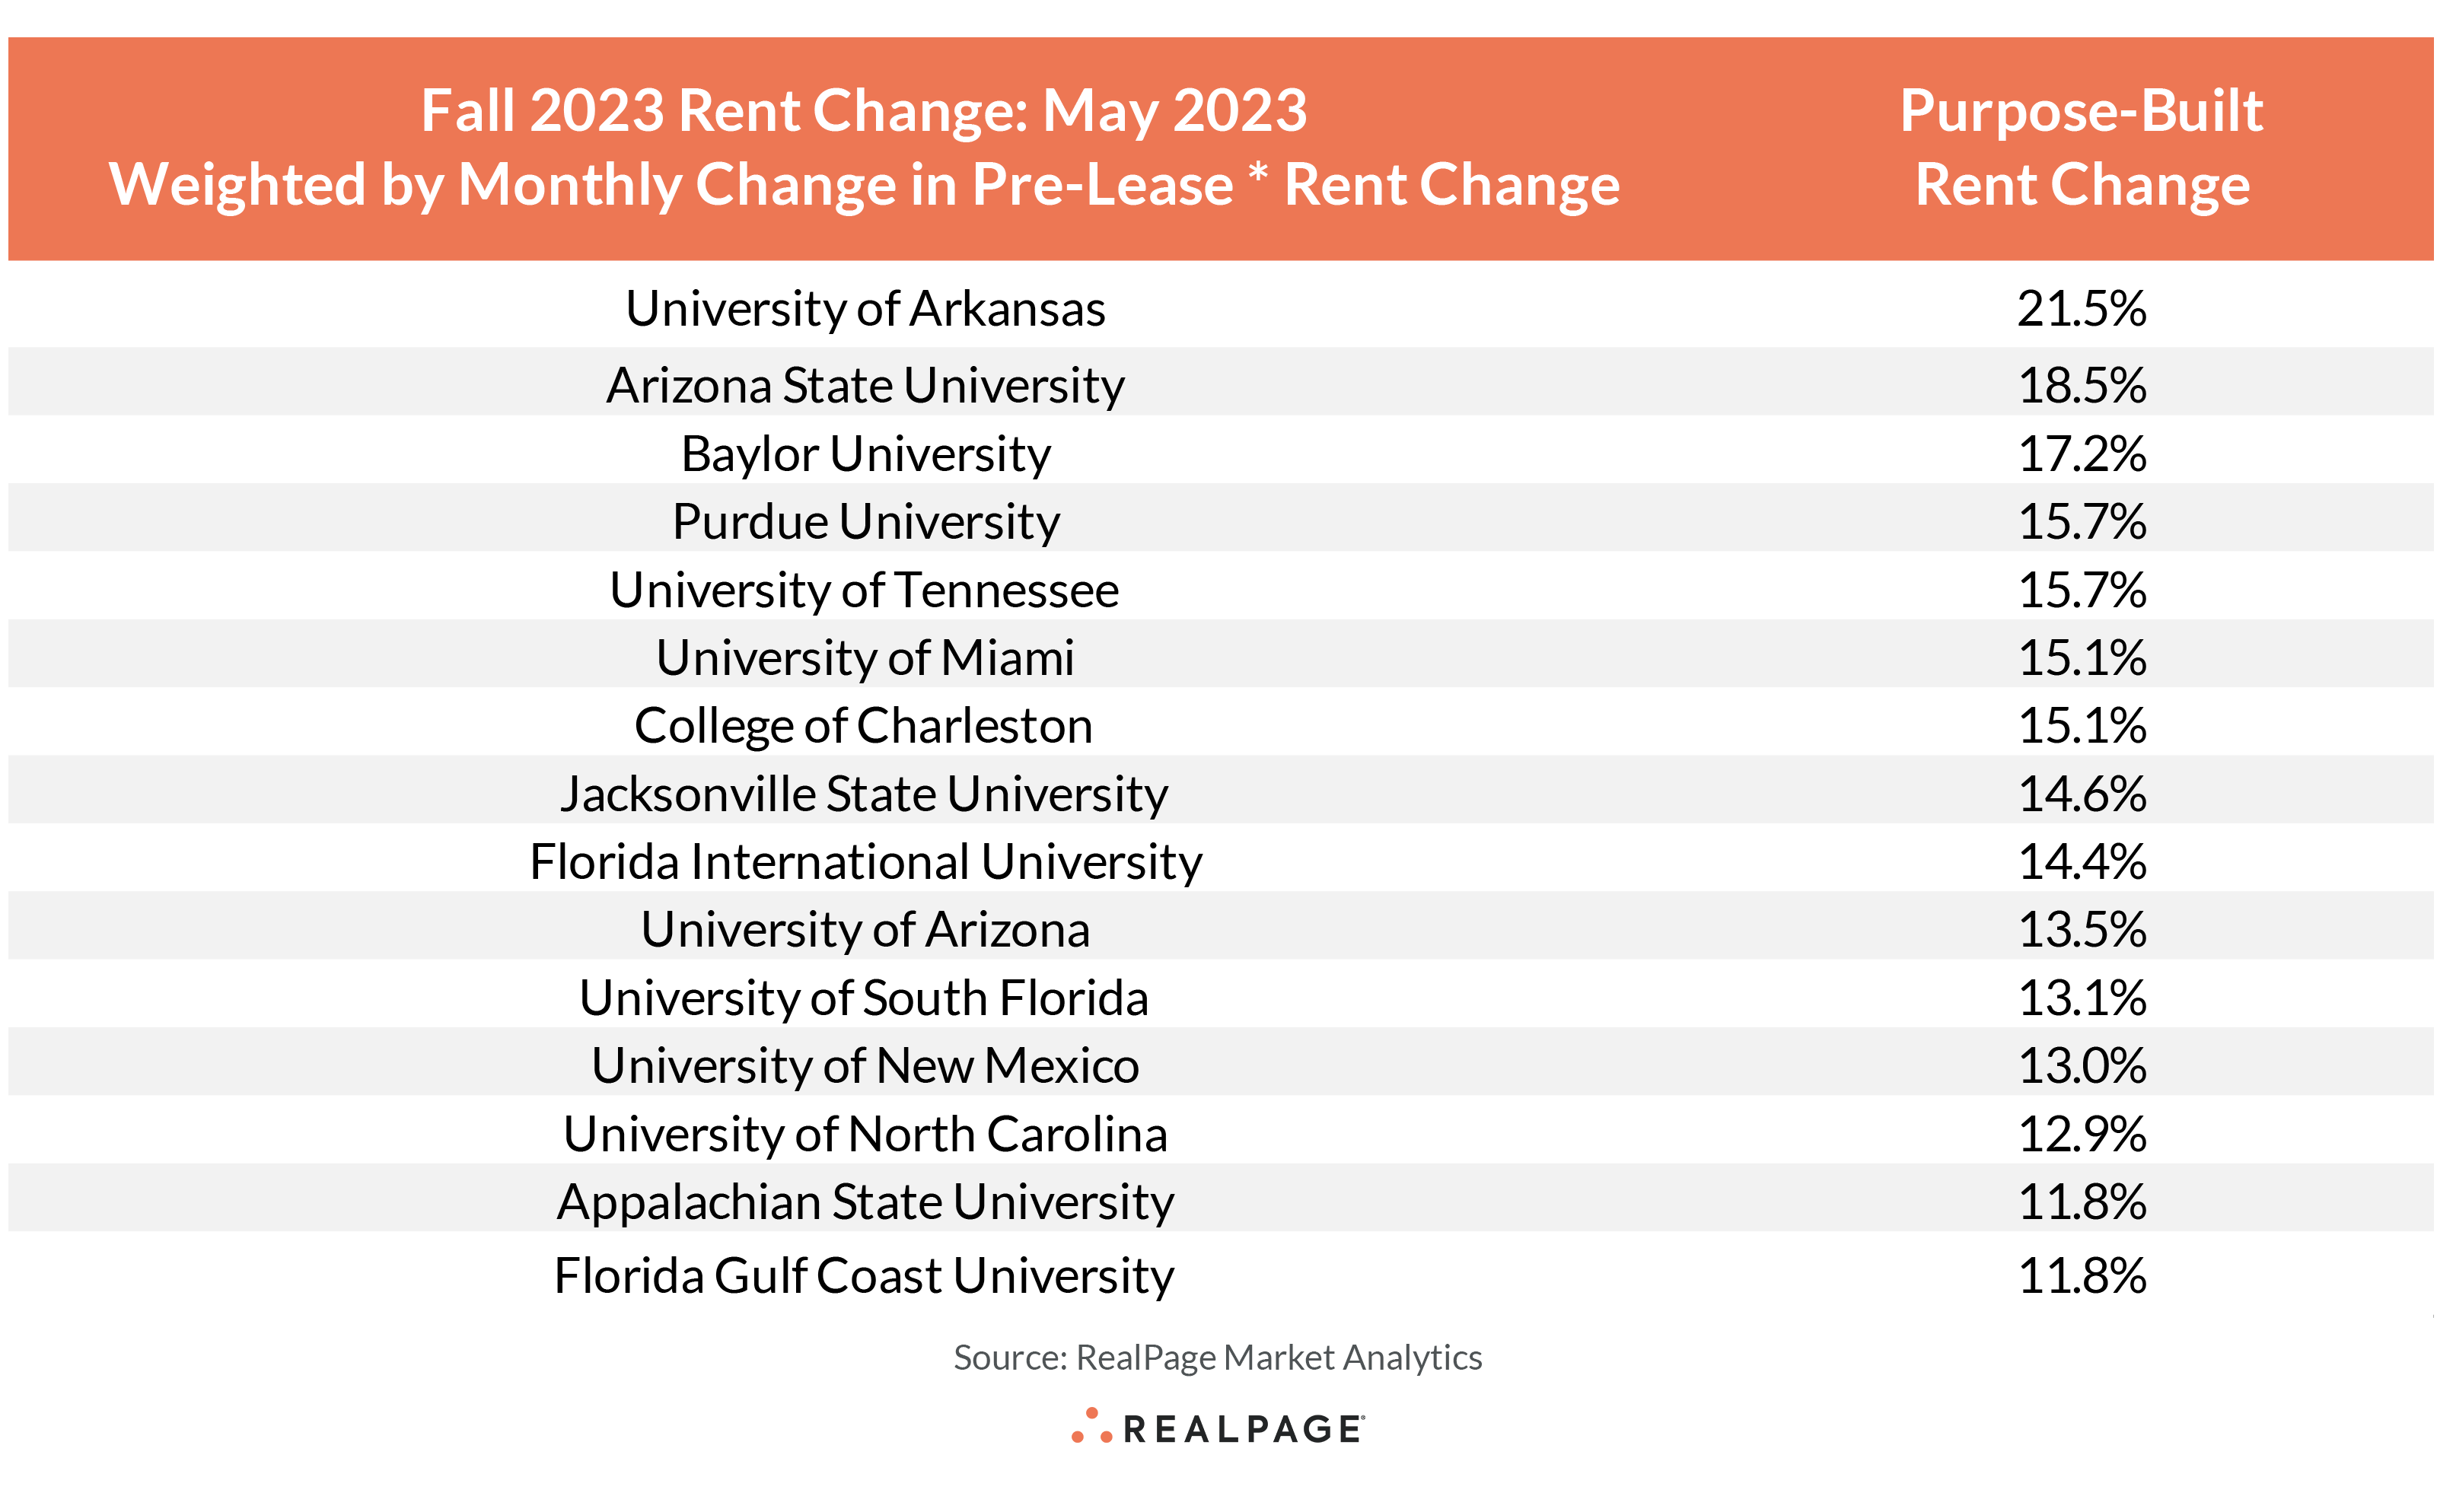 Top Performing Schools for Rent Growth | RealPage Analytics Blog